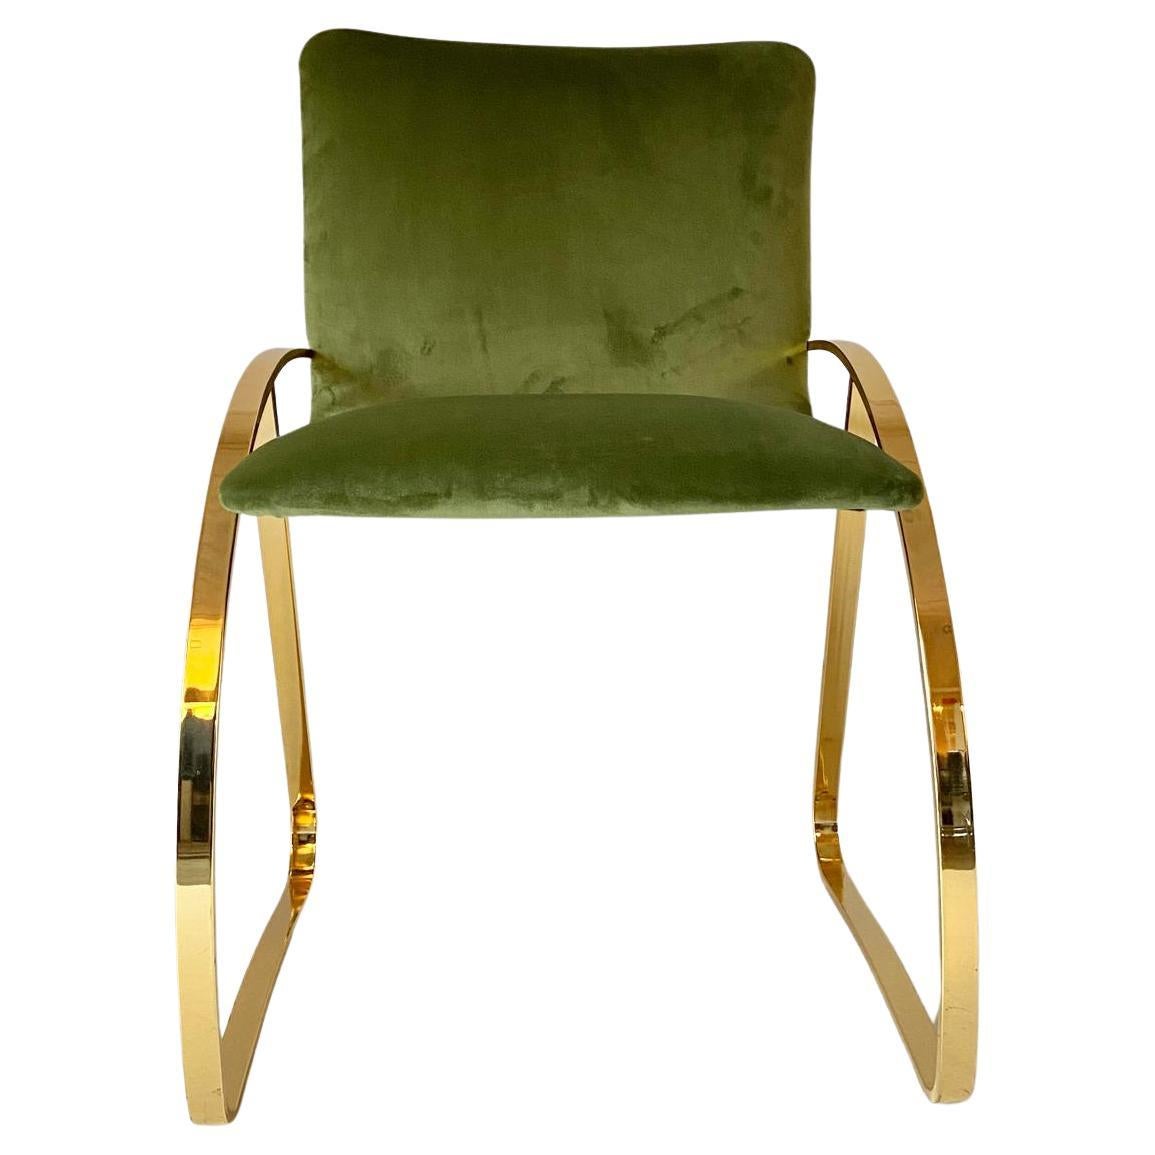 A vintage velvet desk chair, manufactured in Italy in the 1970s. Steel golden chromed structure and beautiful green velvet cover. Chromed has been polished and the water proof green velvet added brand new. The item has a very confortable a slightly